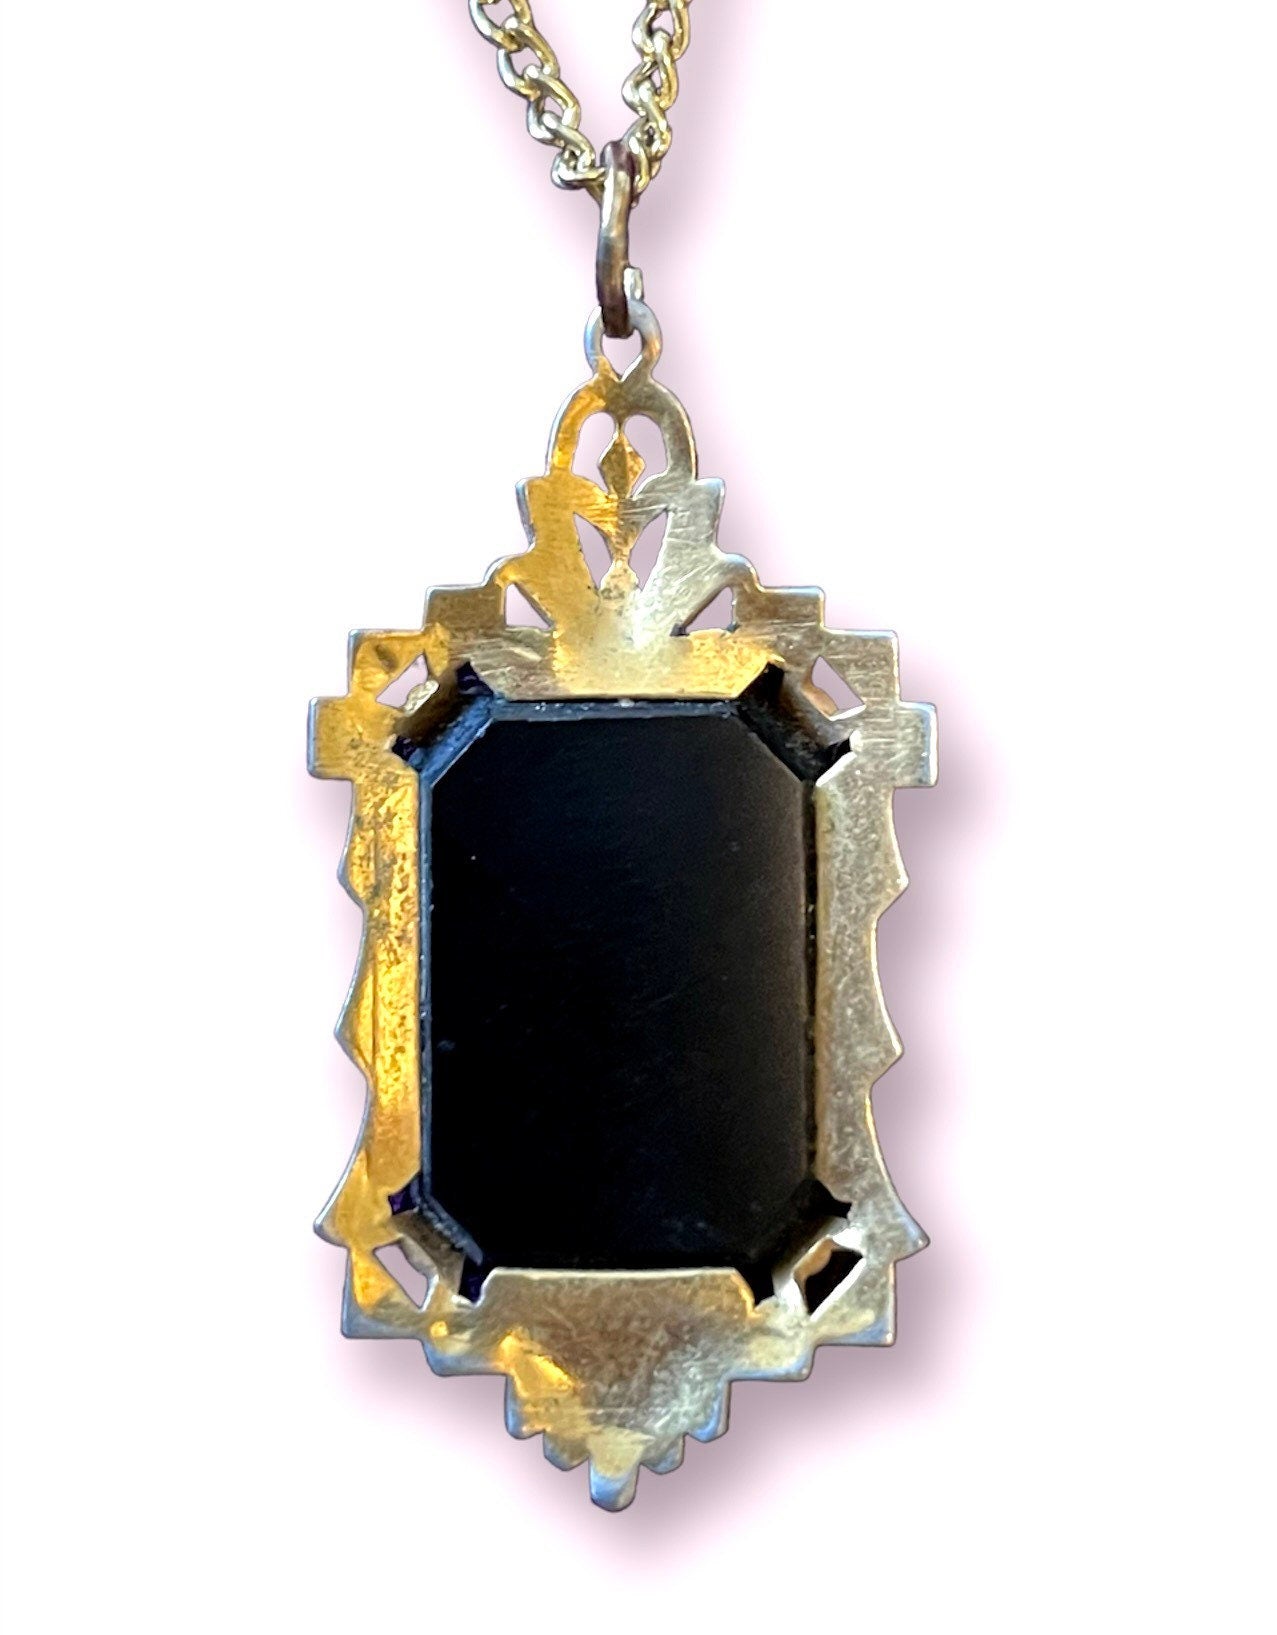 Black & White Glass Shadow Box Silhouette Portrait Cameo Necklace in Gold Art Deco Style Setting